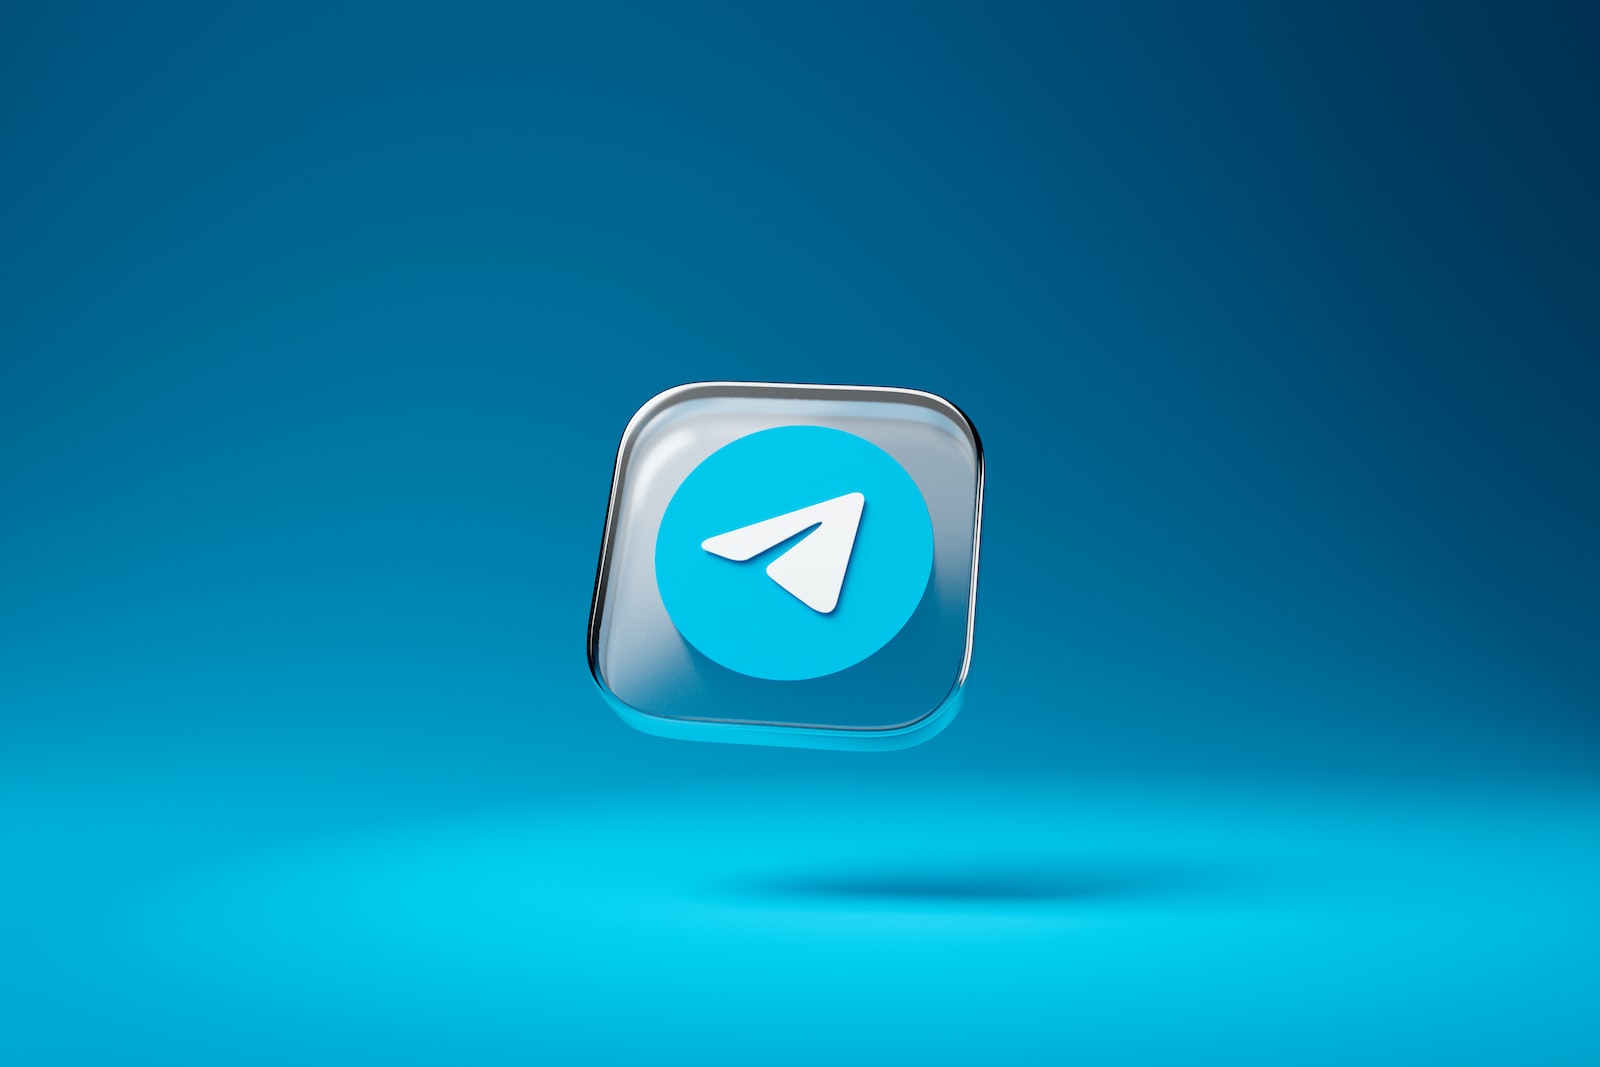 How to make money with a Telegram channel